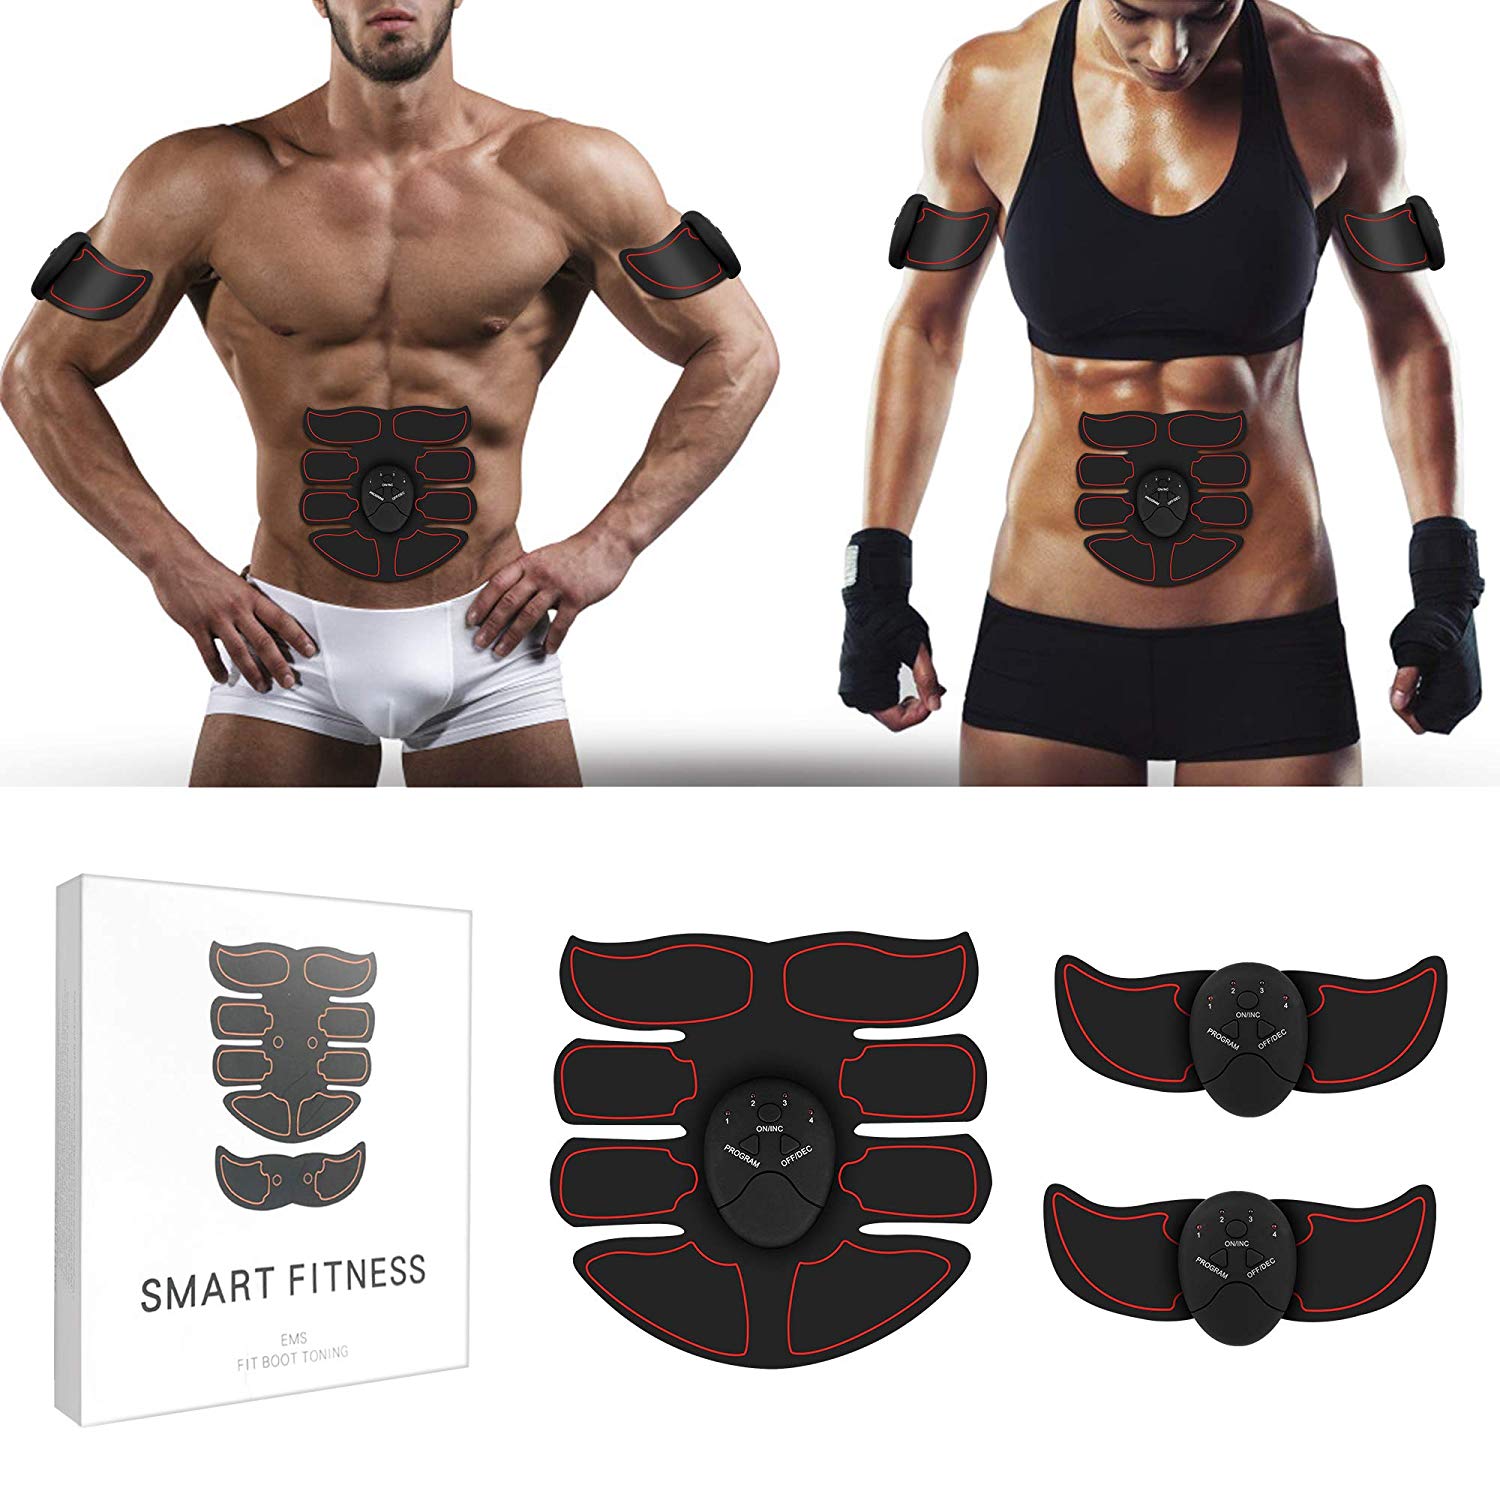 Catzon Muscle Toner With 20 EXTRA Gel Pads EMS Abdominal Toning Belt For Men Women Portable Arm/Leg Trainer